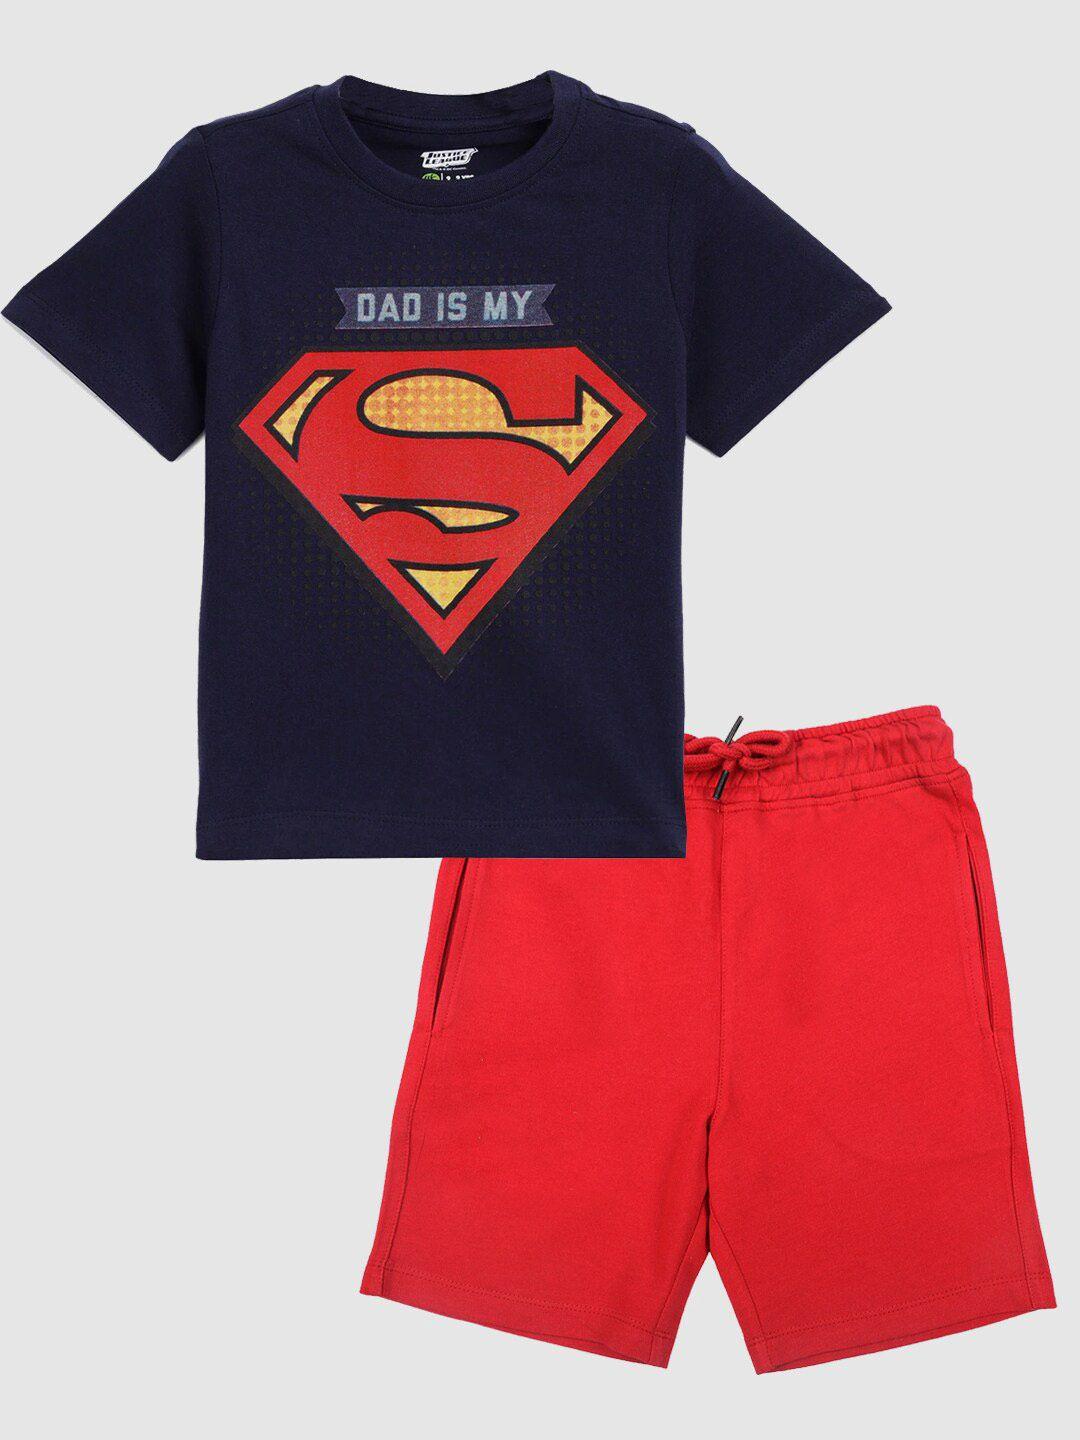 yk justice league boys navy blue & red superman printed t-shirt with shorts